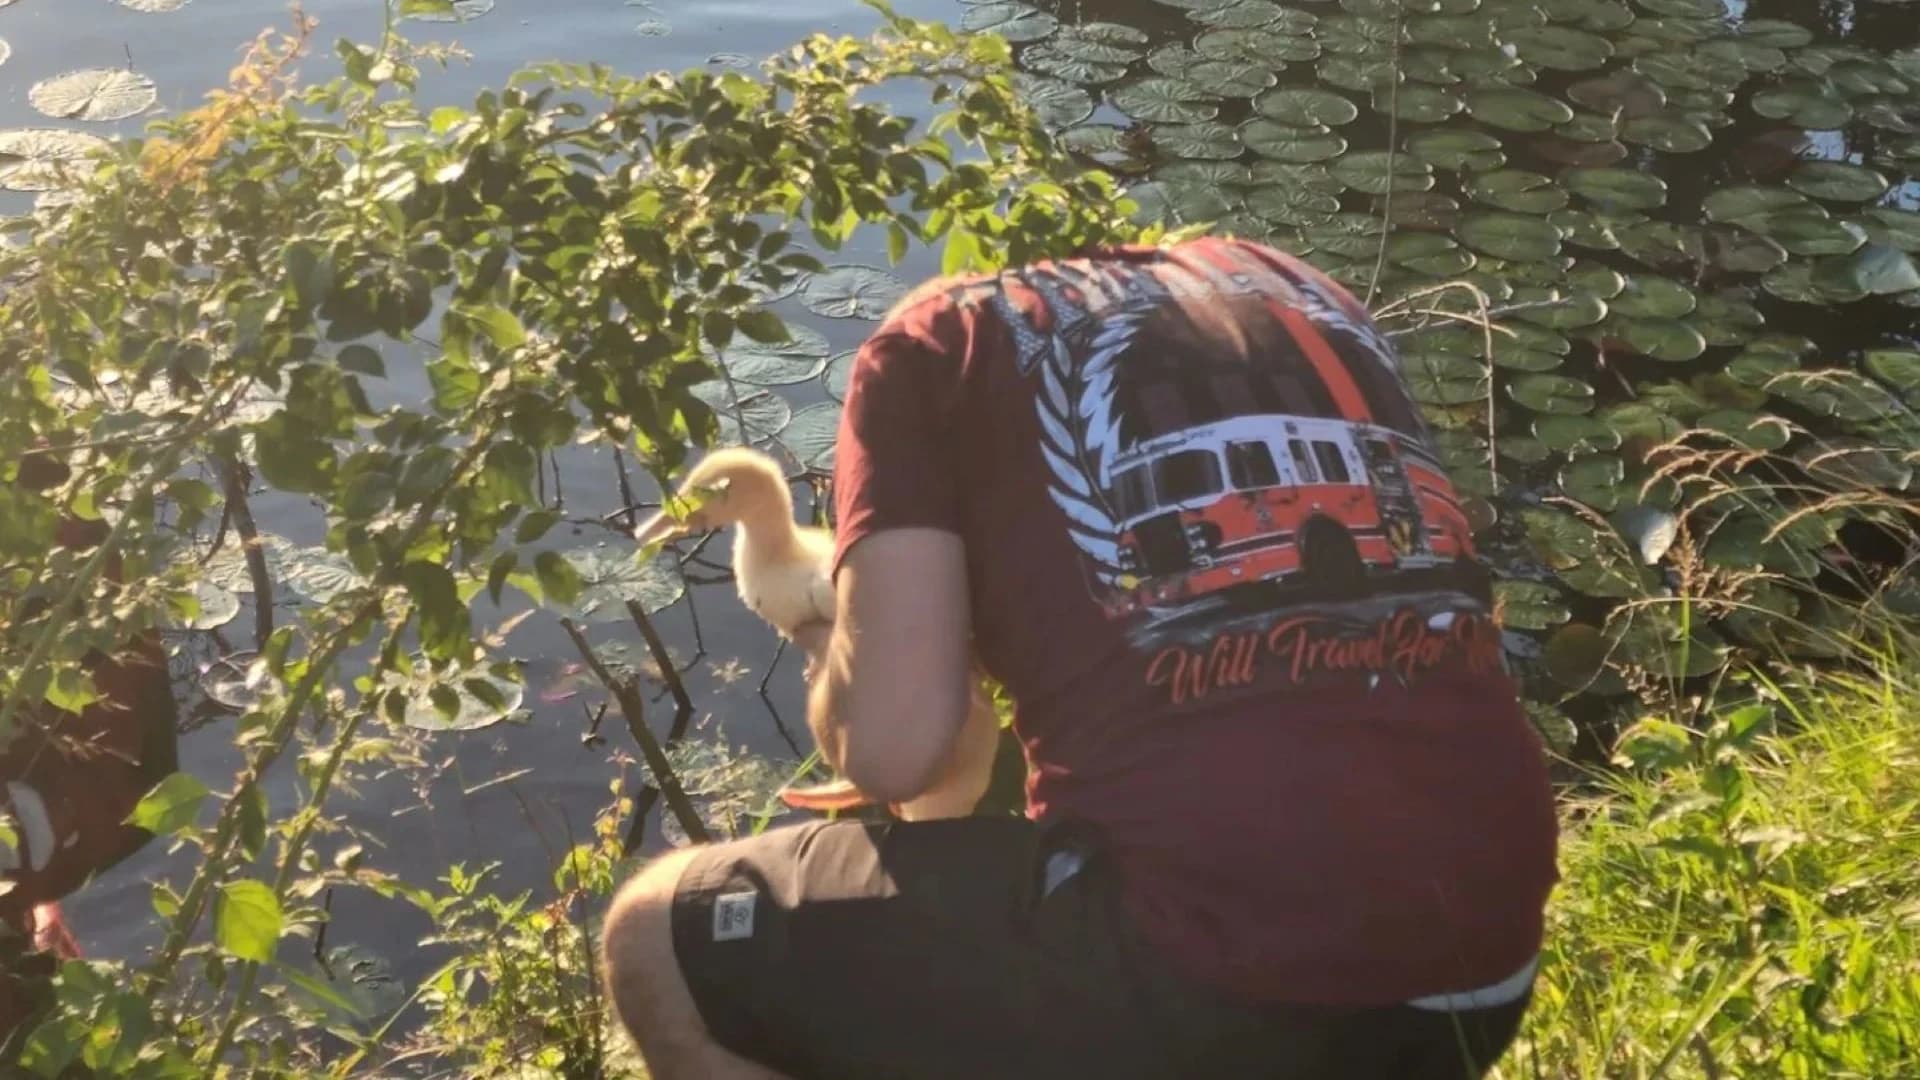 To the rescue! Theills FD rescues 3 people, 3 ducks Friday